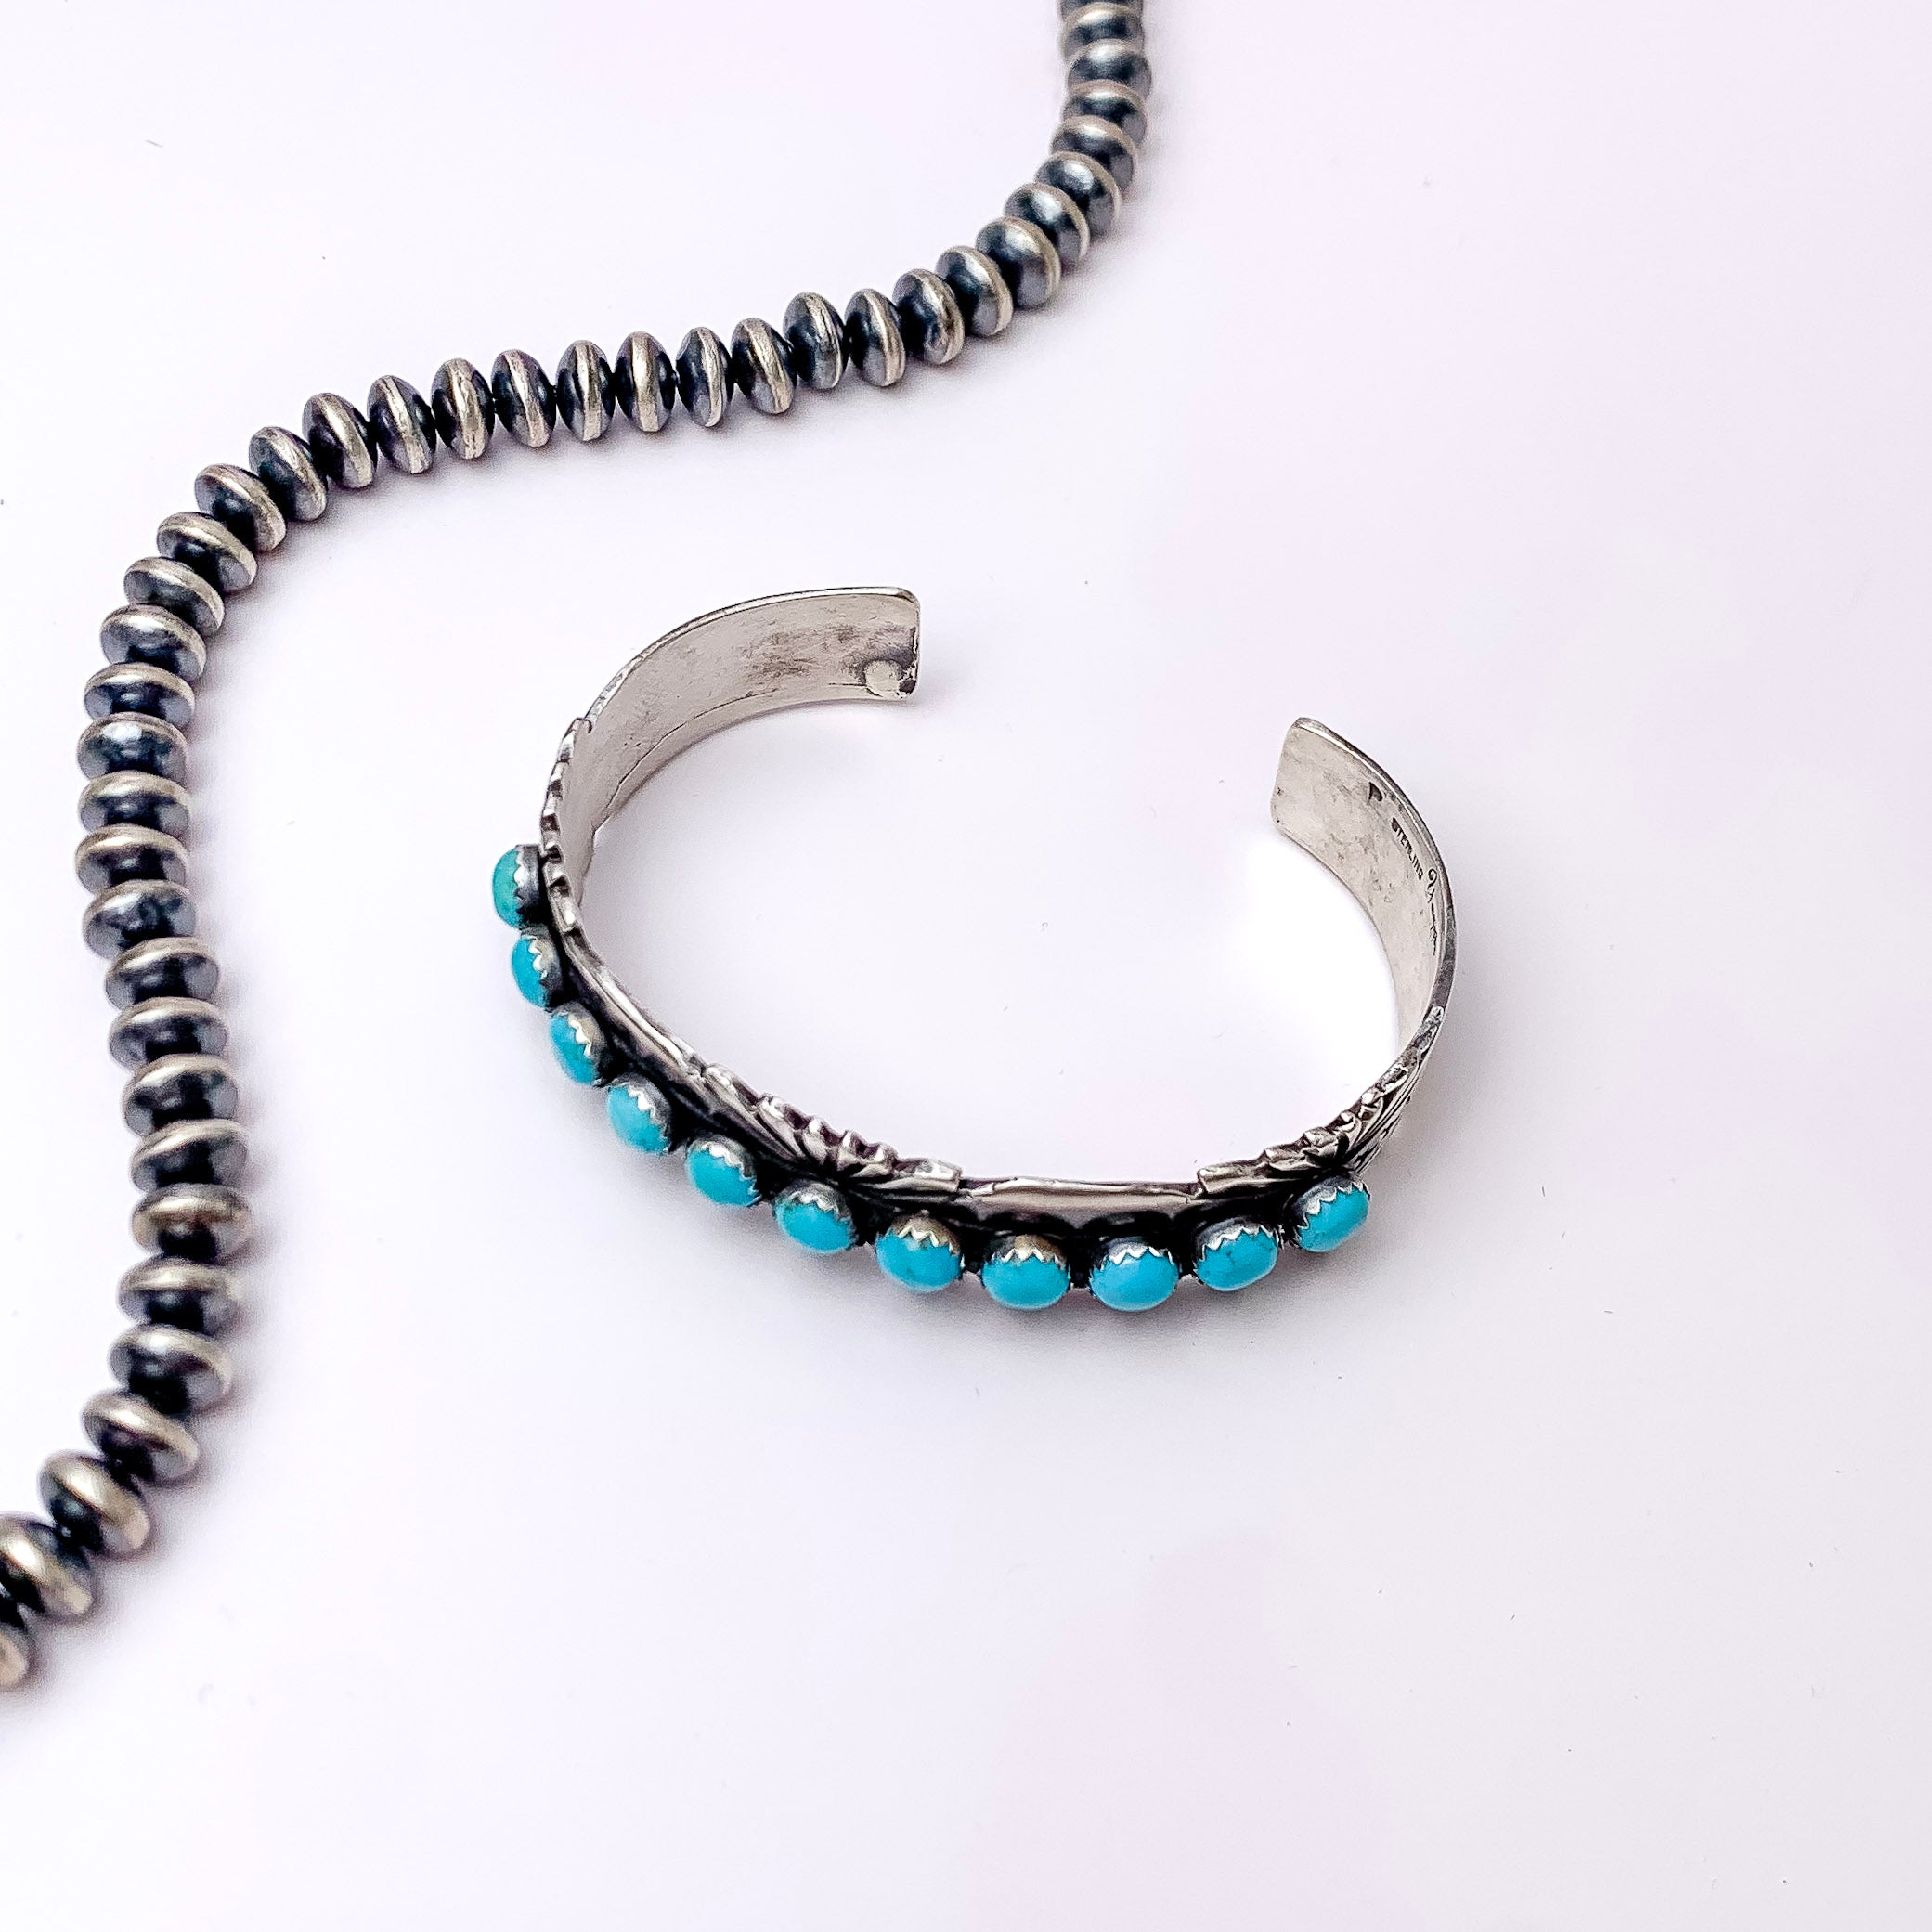 P Yazzie | Navajo Handmade Sterling Silver Cuff With Eleven Small Turquoise Stones - Giddy Up Glamour Boutique